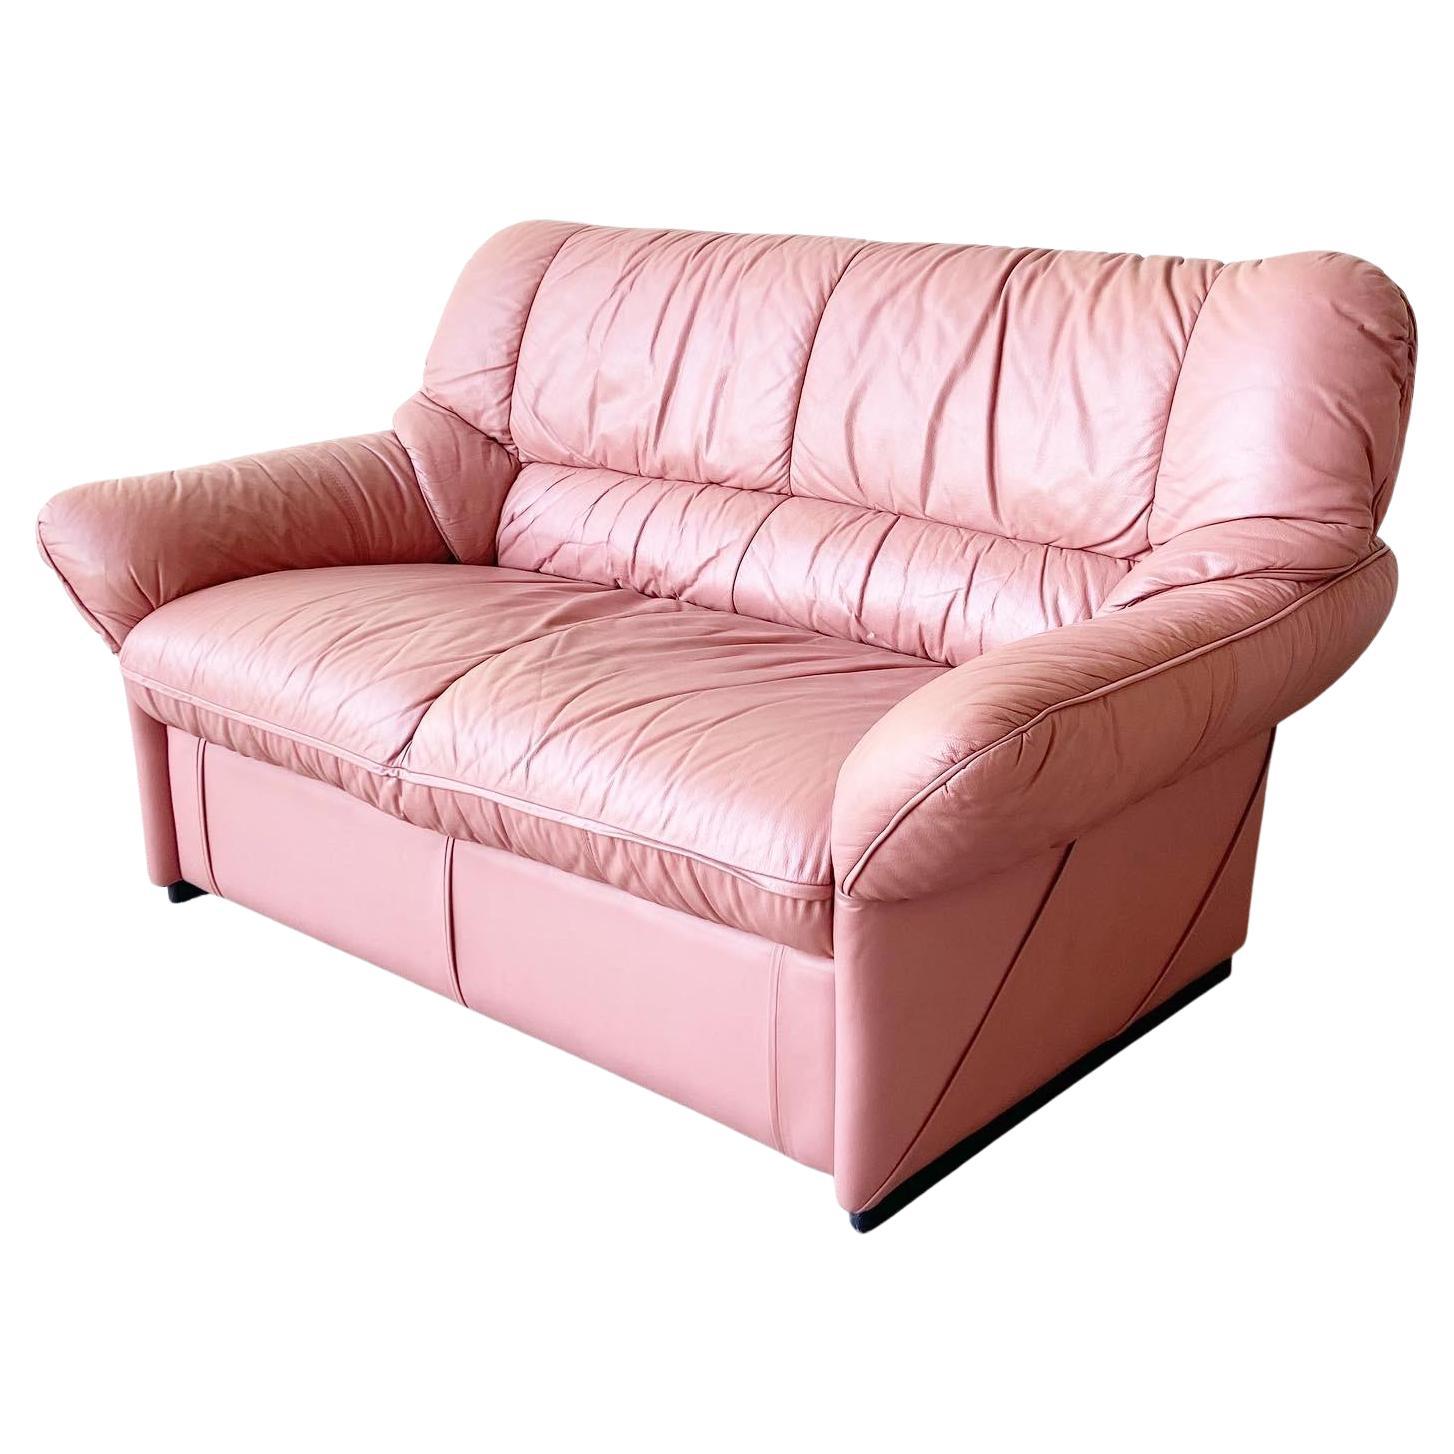 Postmodern Pink Leatherette Sofa Love Seat by Pro-Design